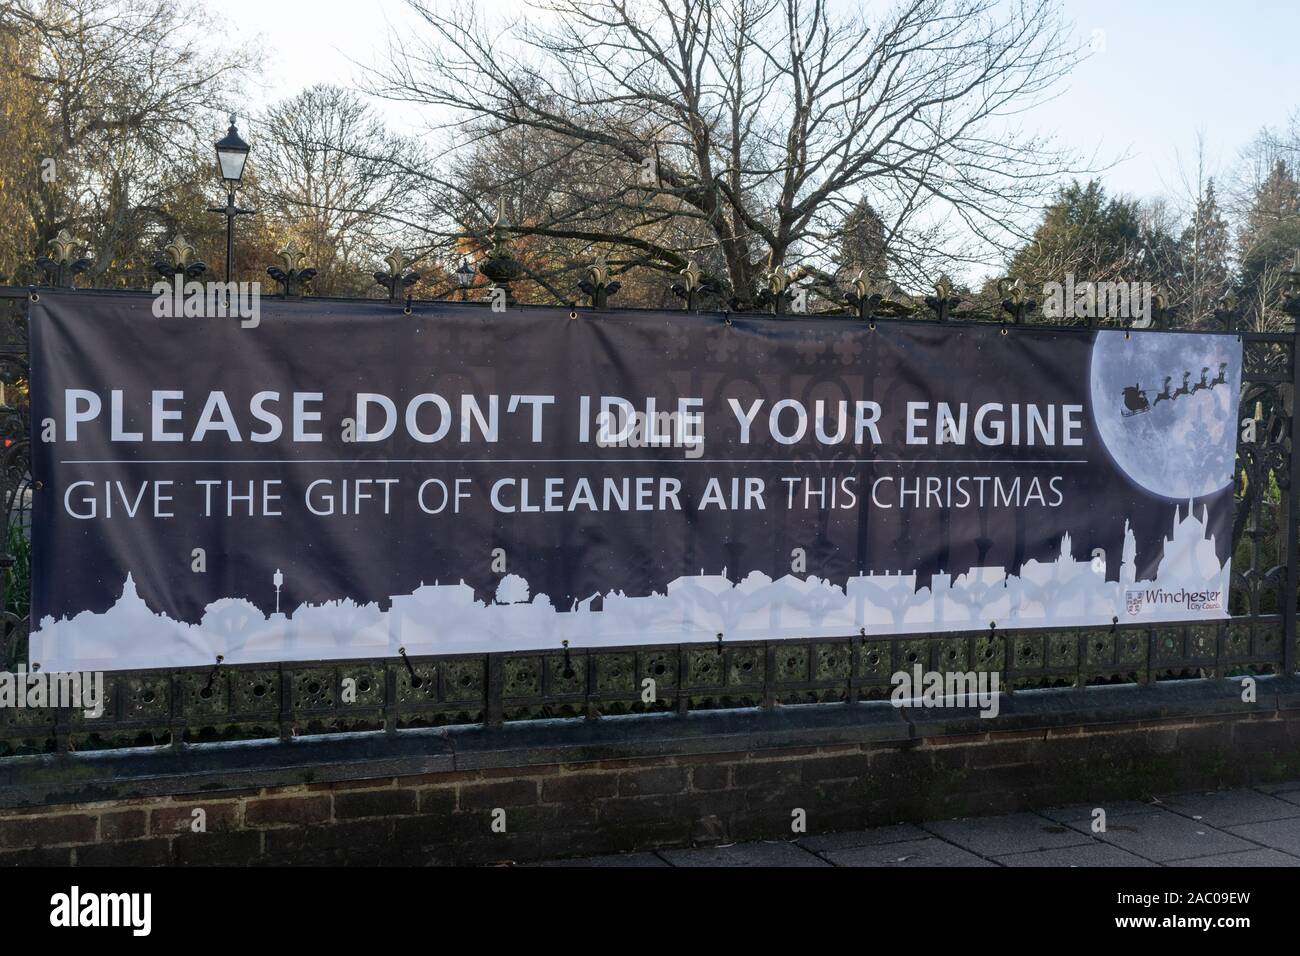 Please don't idle your engine give the gift of cleaner air this Christmas - banner promoting clean air and less pollution, Winchester city centre UK Stock Photo